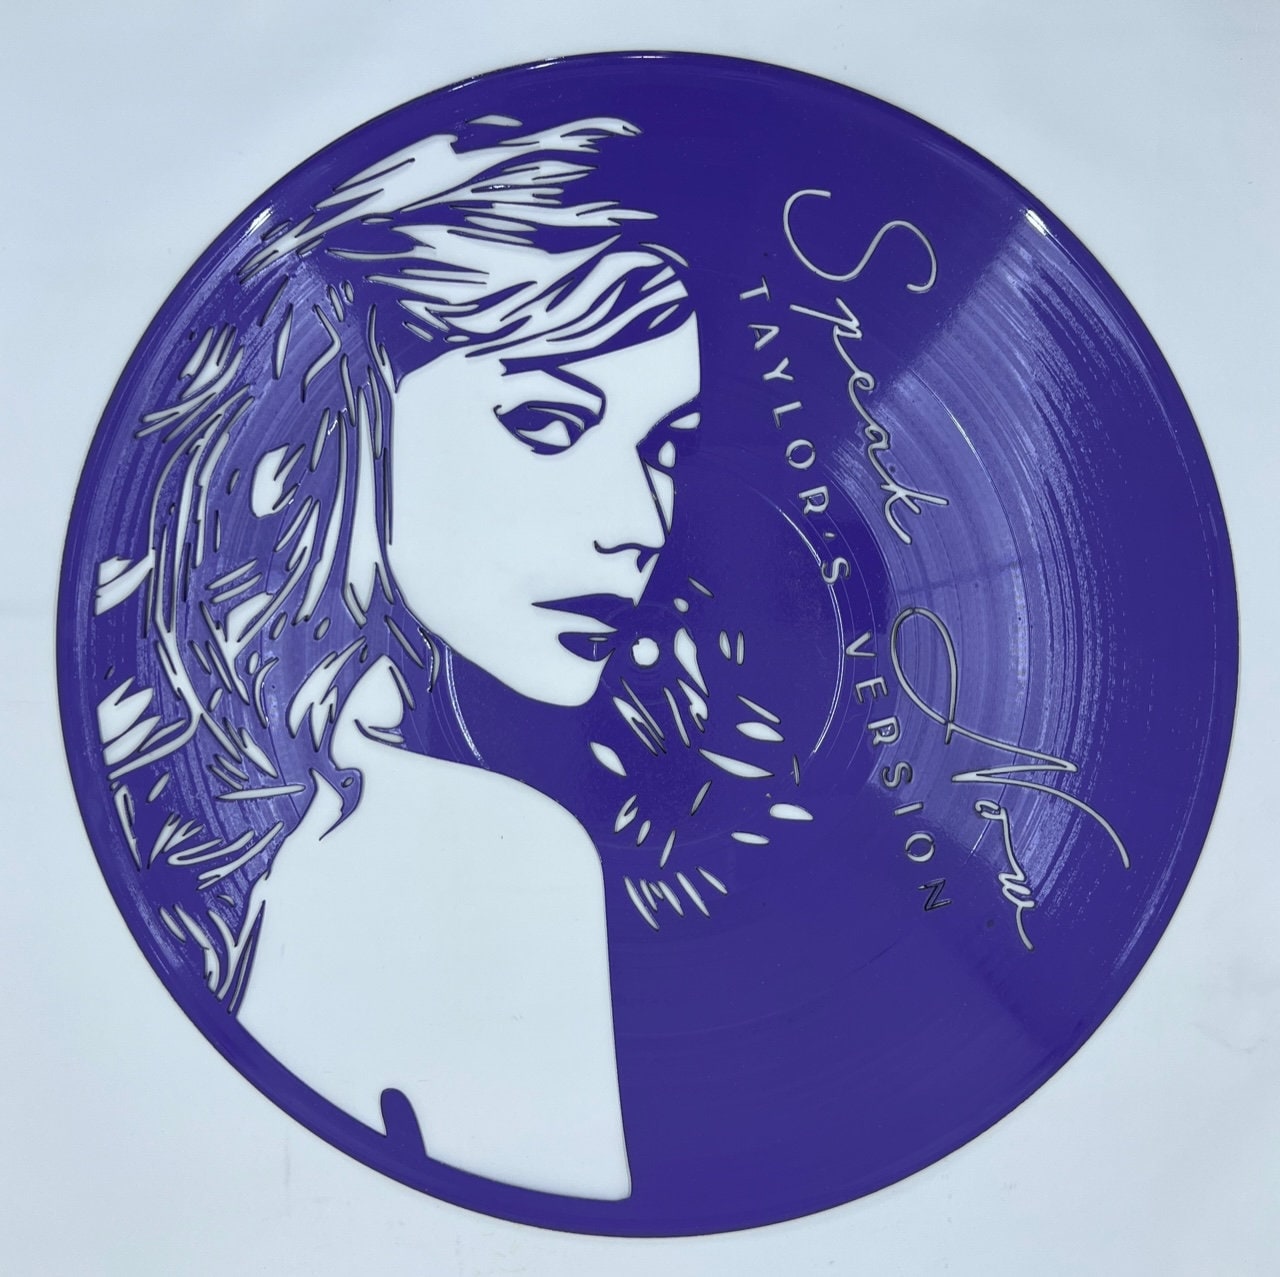 Taylor Swift Laser Cut Vinyl Record Art Record Cutout Wall Art Room Décor  Music Gifts for Any Occasion free Shipping 